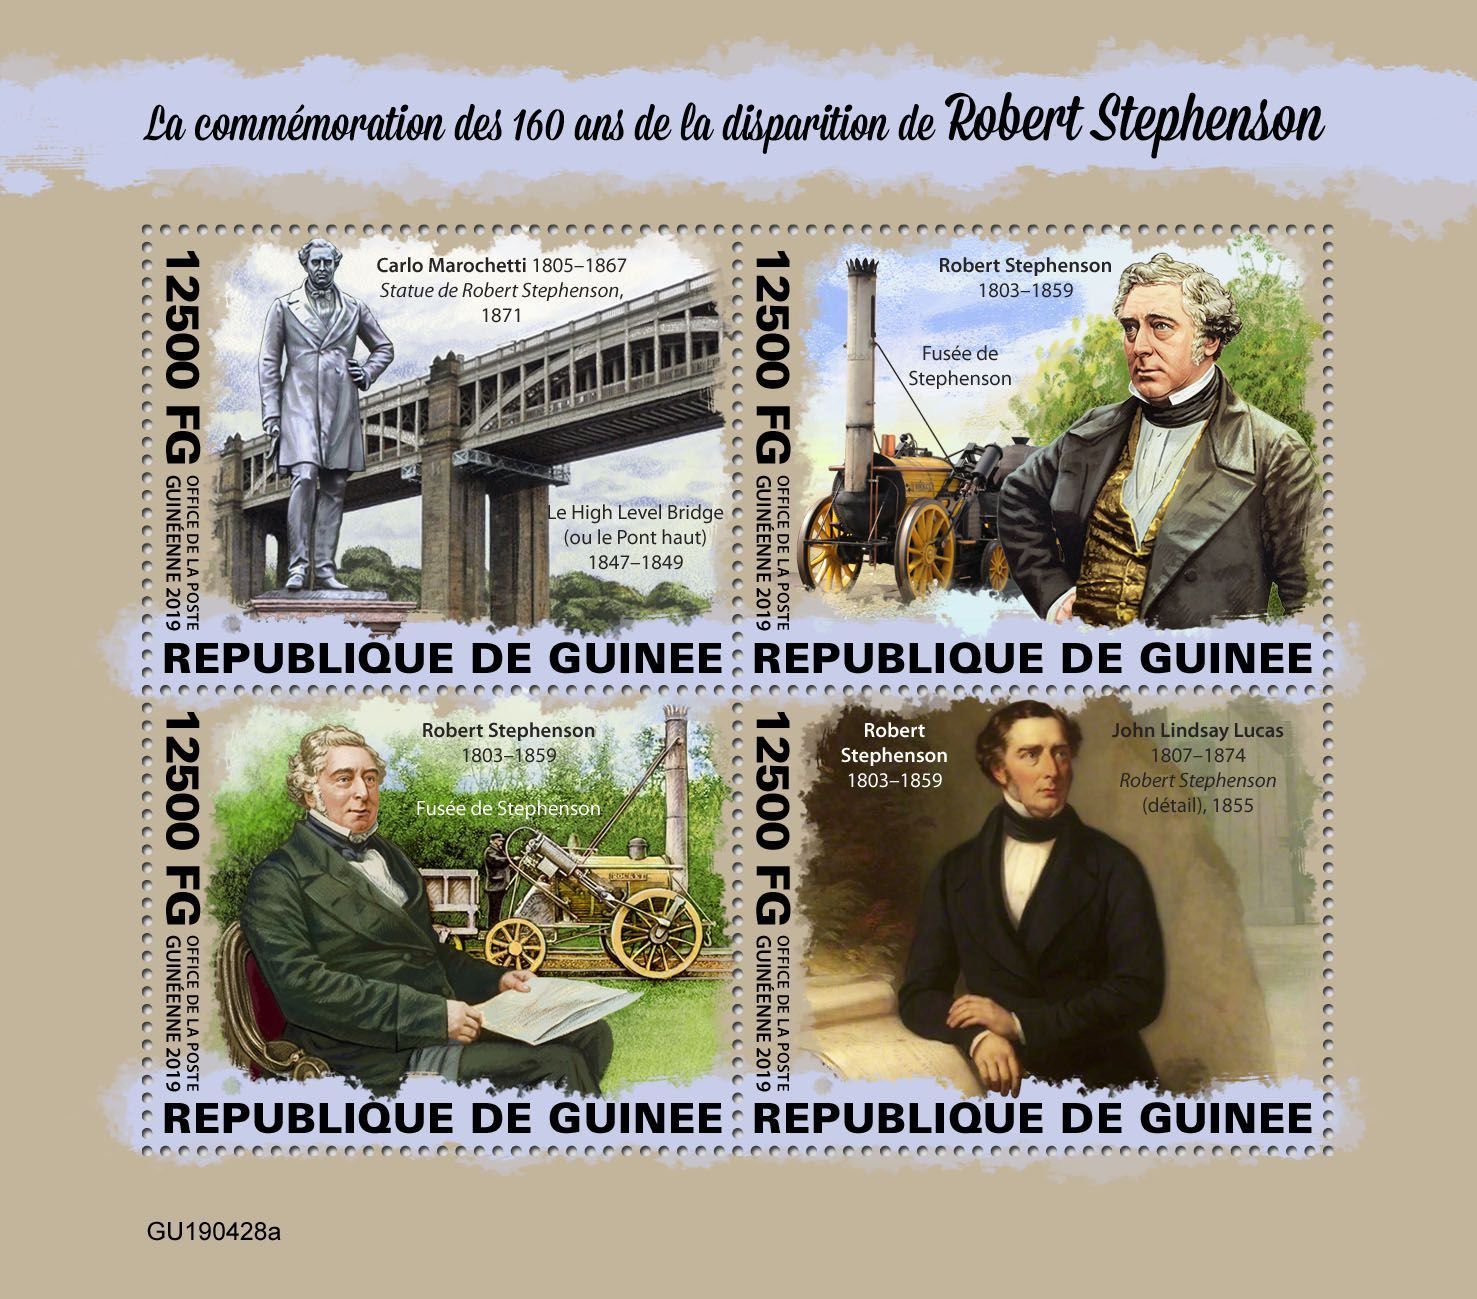 Robert Stephenson - Issue of Guinée postage stamps